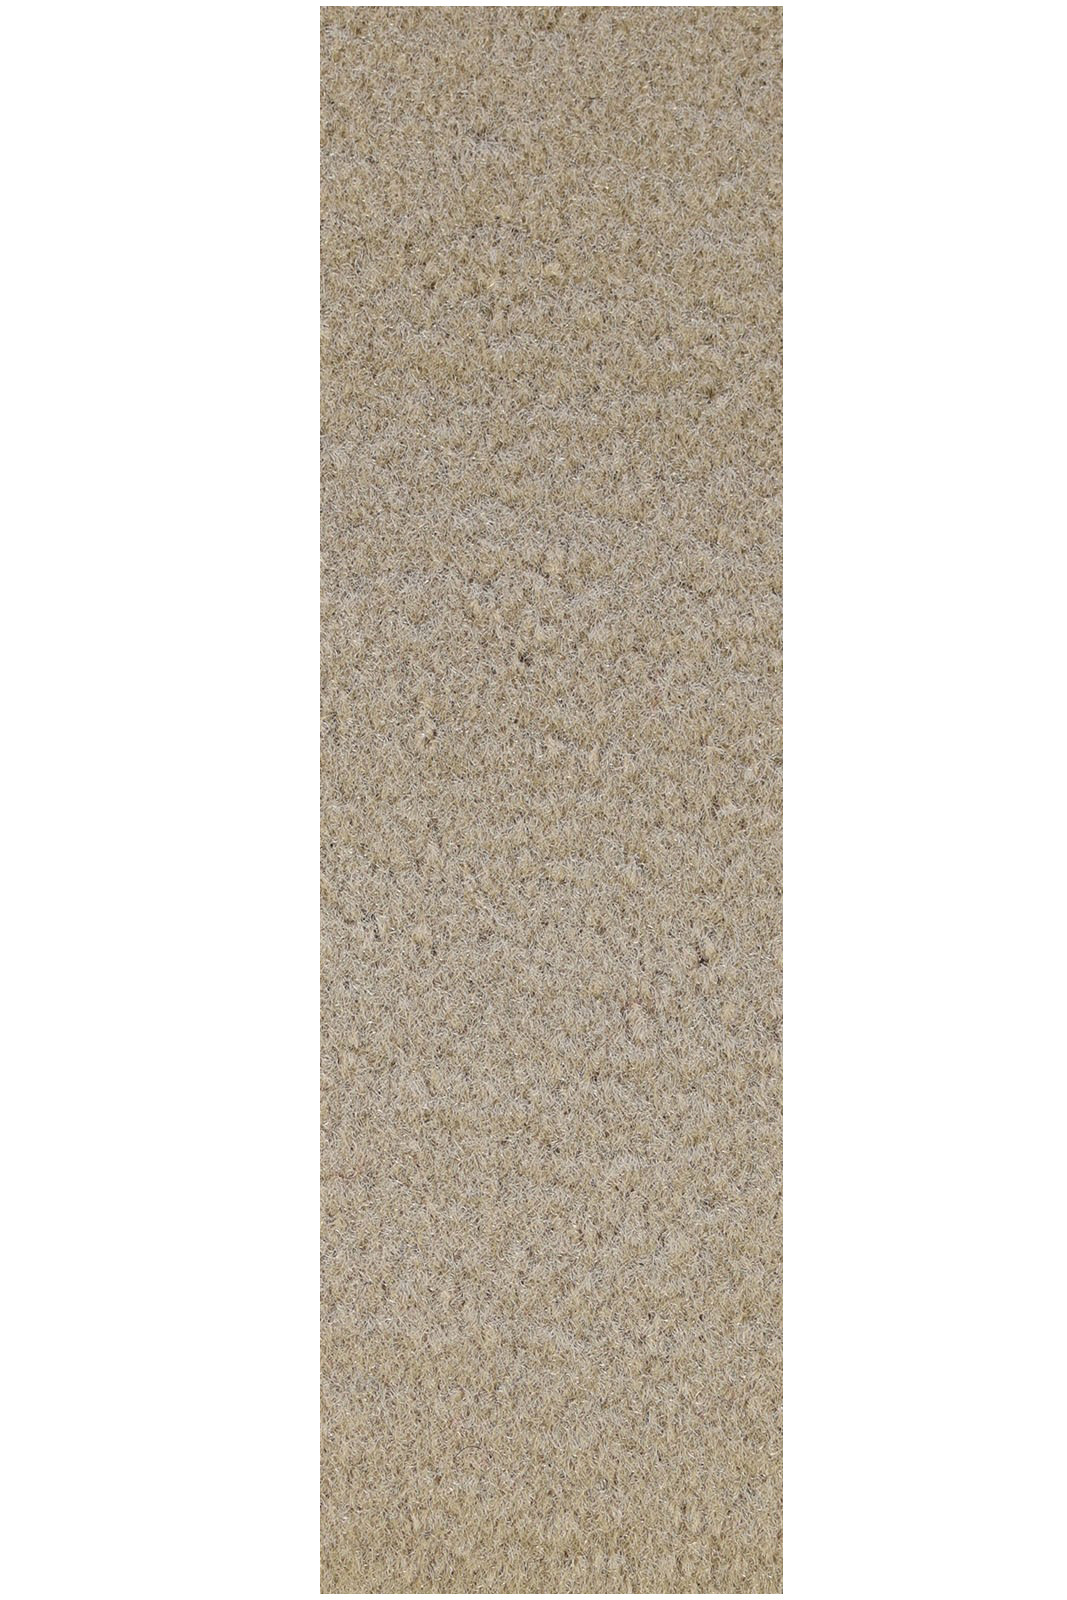 Commercial Indoor/Outdoor Beige Custom Size Runner 4' x 40' - Area Rug with Rubber Marine Backing for Patio, Porch, Deck, Boat, Basement or Garage with Premium Bound Polyester Edges - image 1 of 1